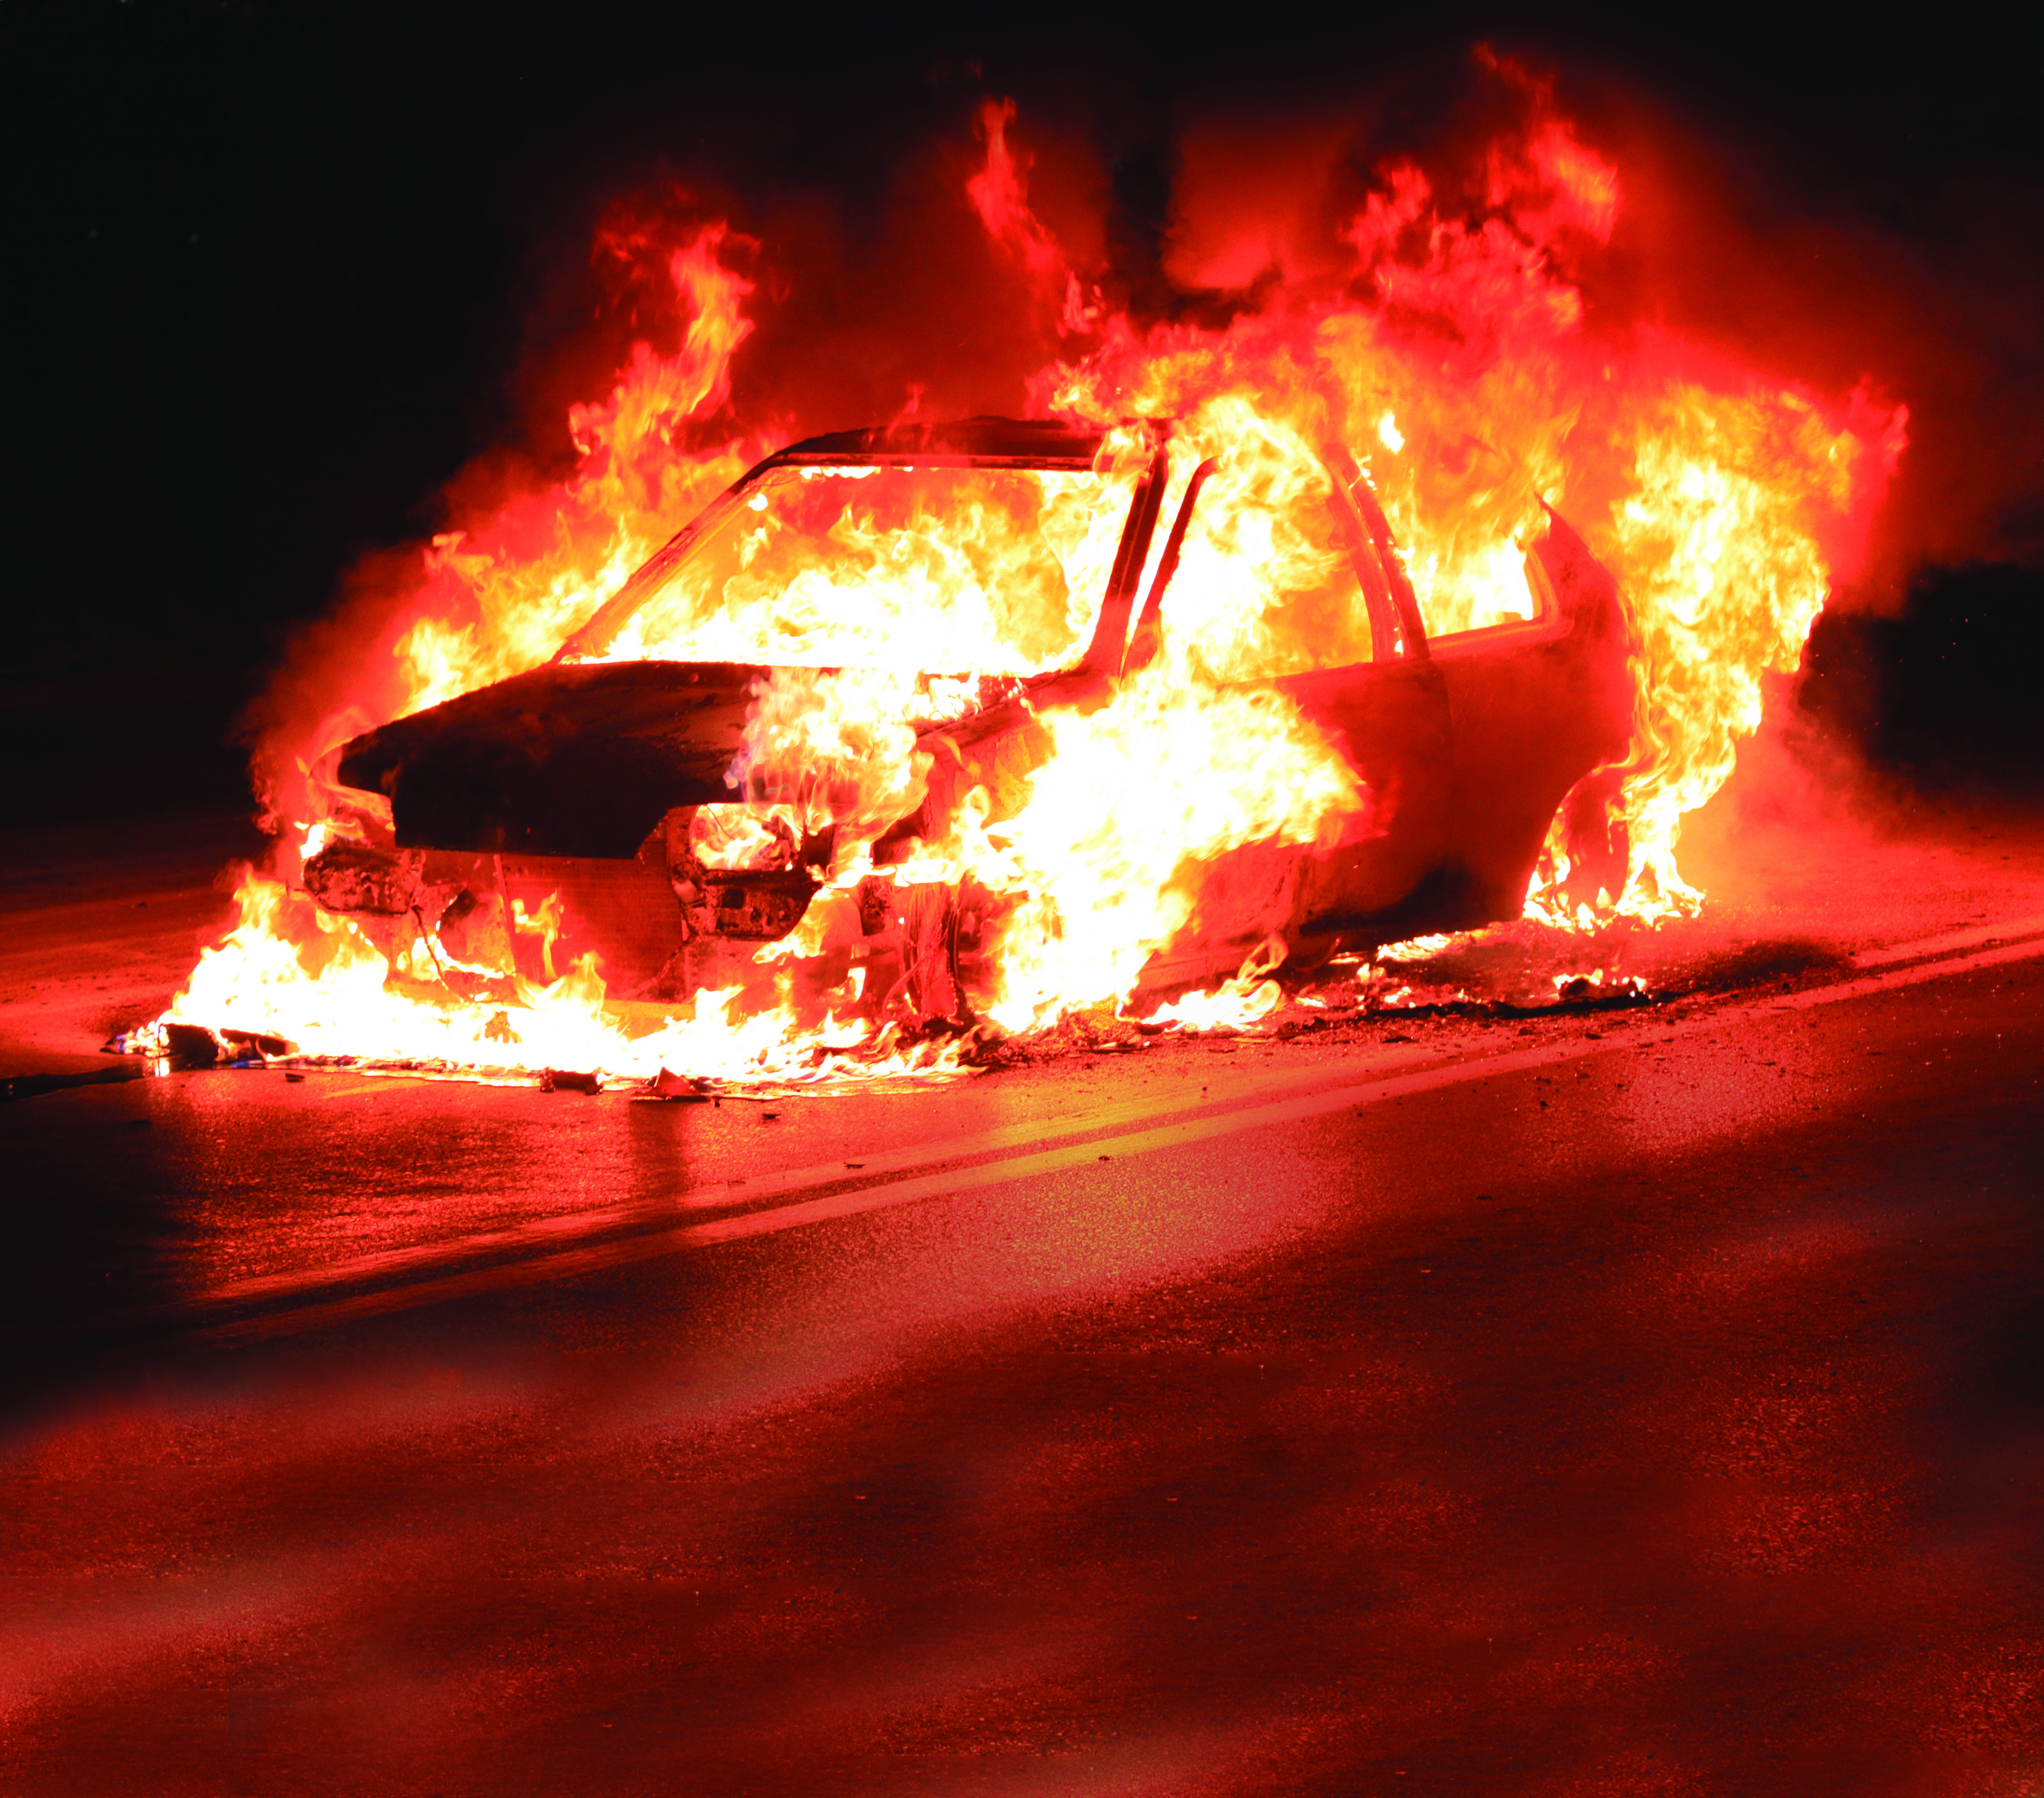 Duplicate parts can cause fire in vehicles, says Royal Oman Police